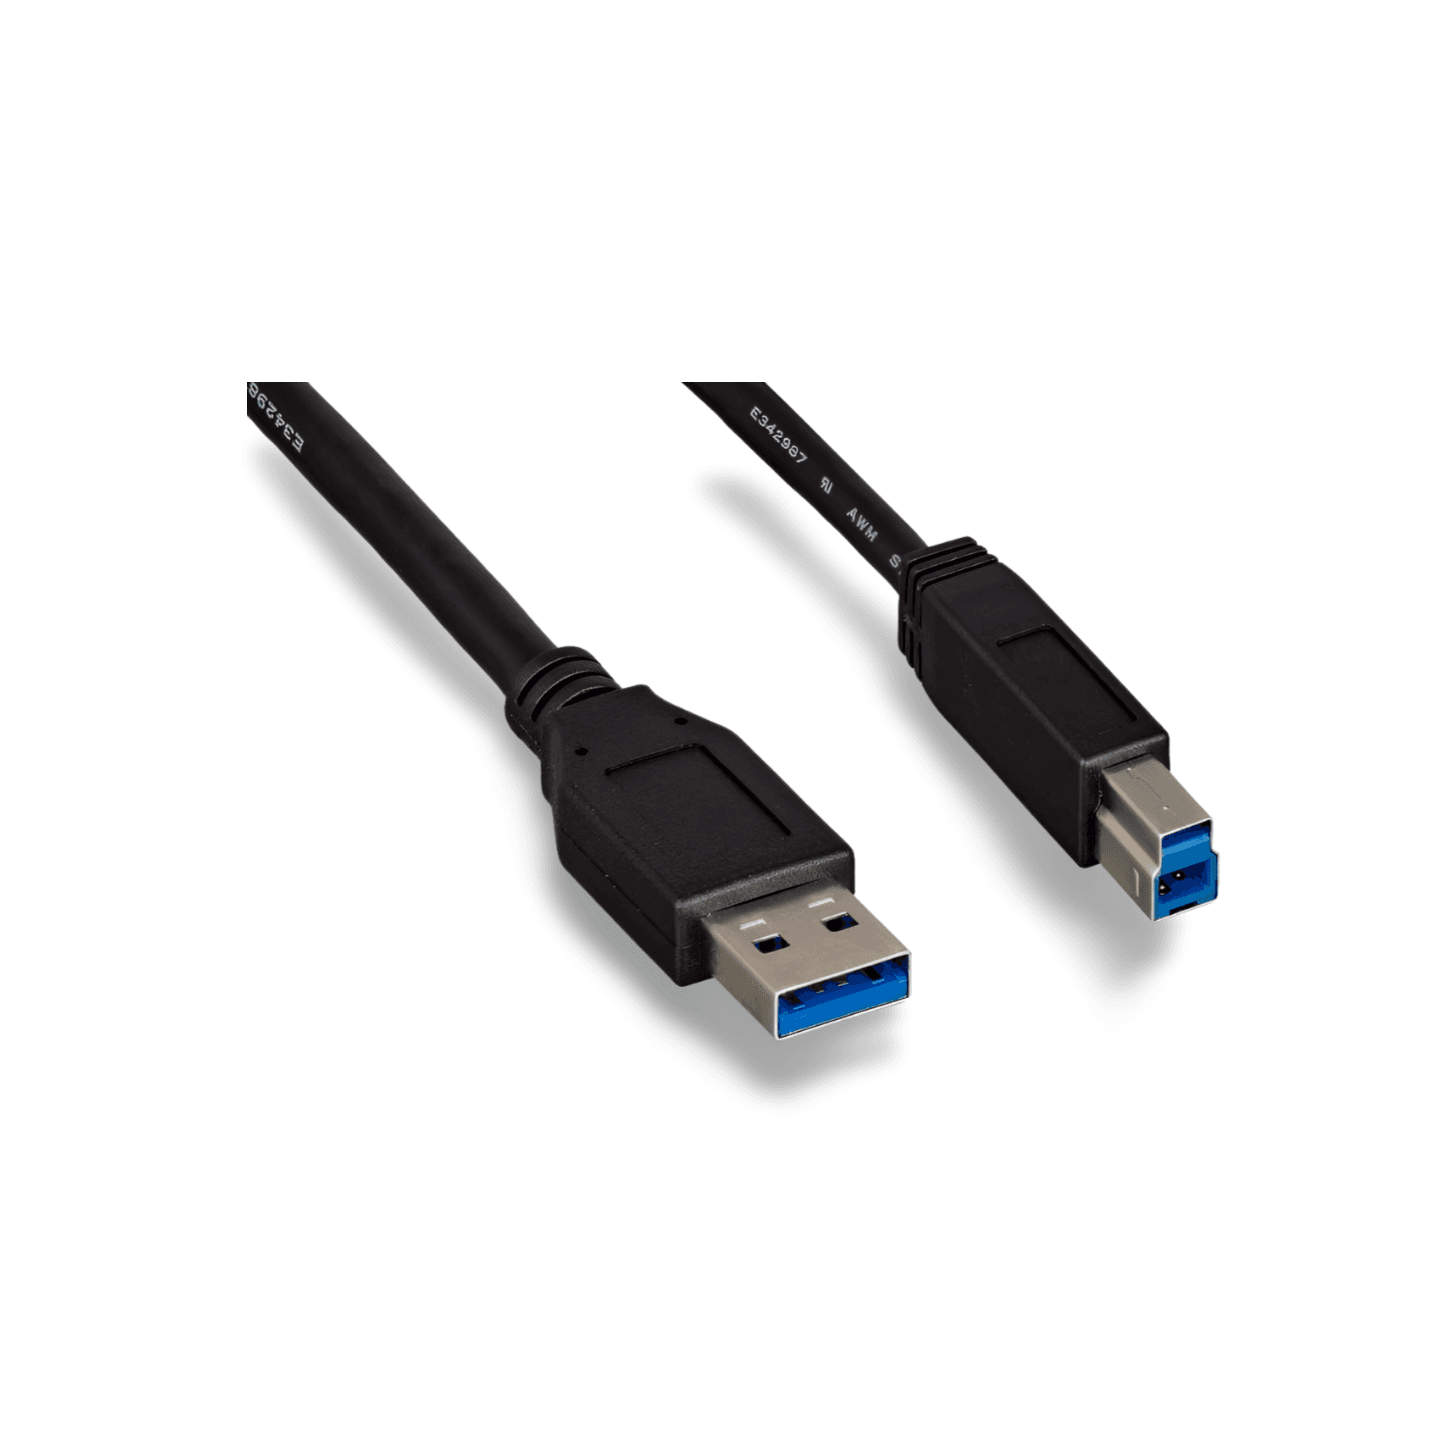 3ft USB 3.0 SuperSpeed Type A to Type B Cable black